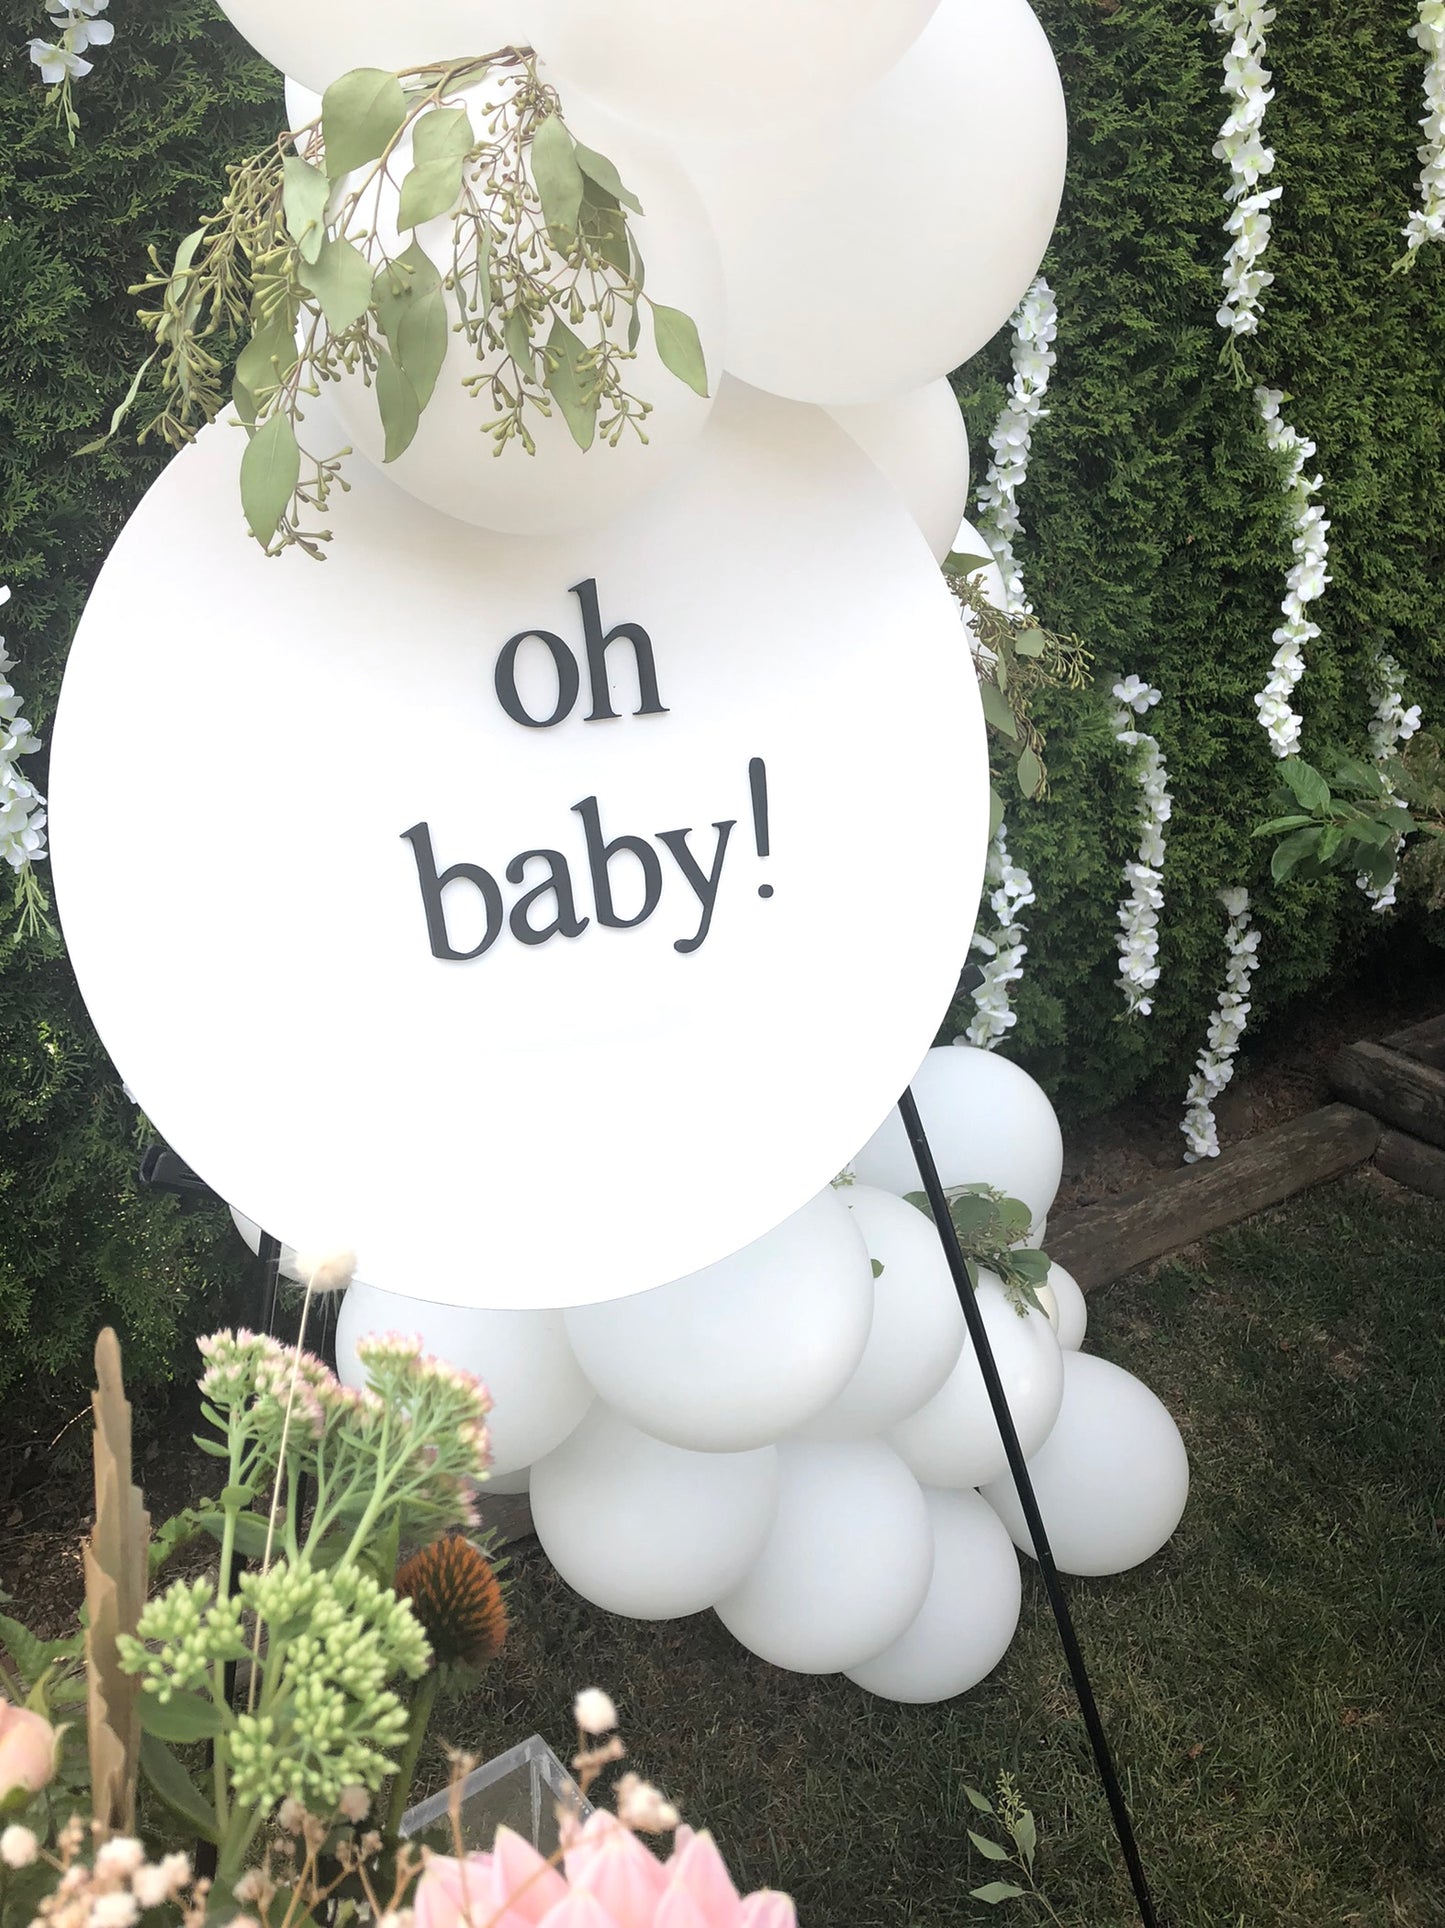 Oh baby ! Baby Shower 3D Sign